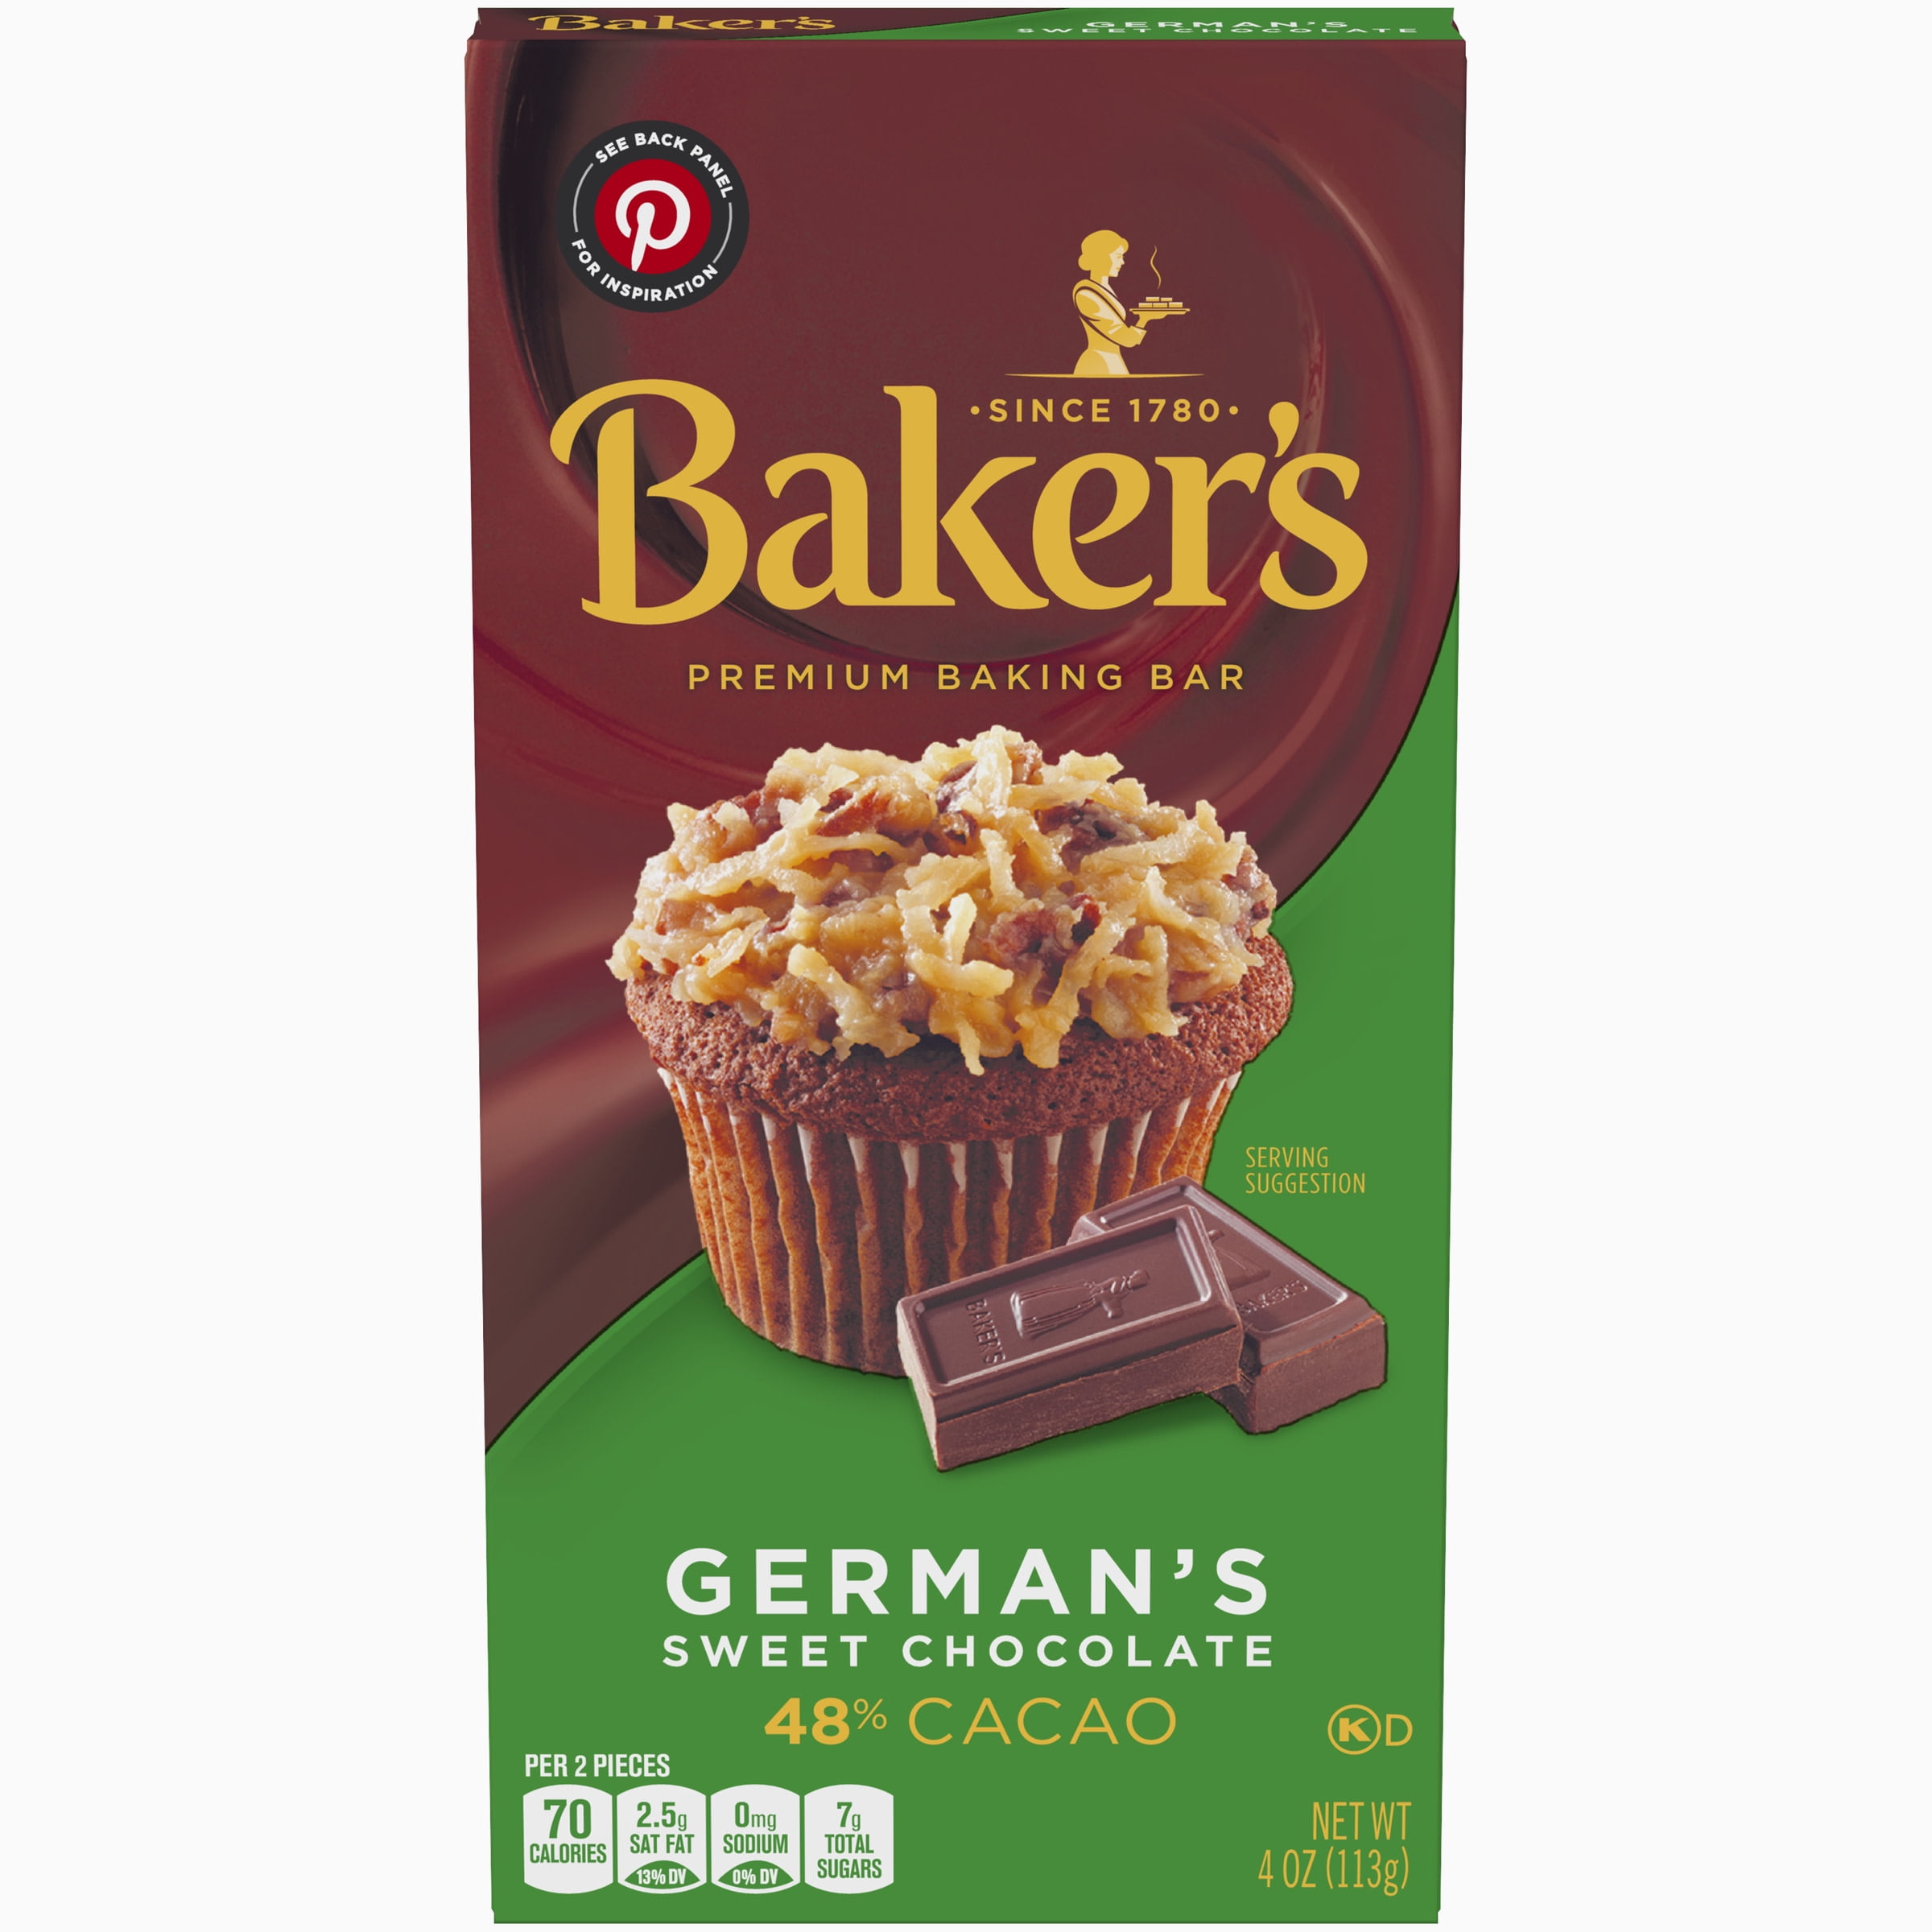 Baker's German's Sweet Chocolate Premium Baking Bar with 48% Cacao, 4 oz Box